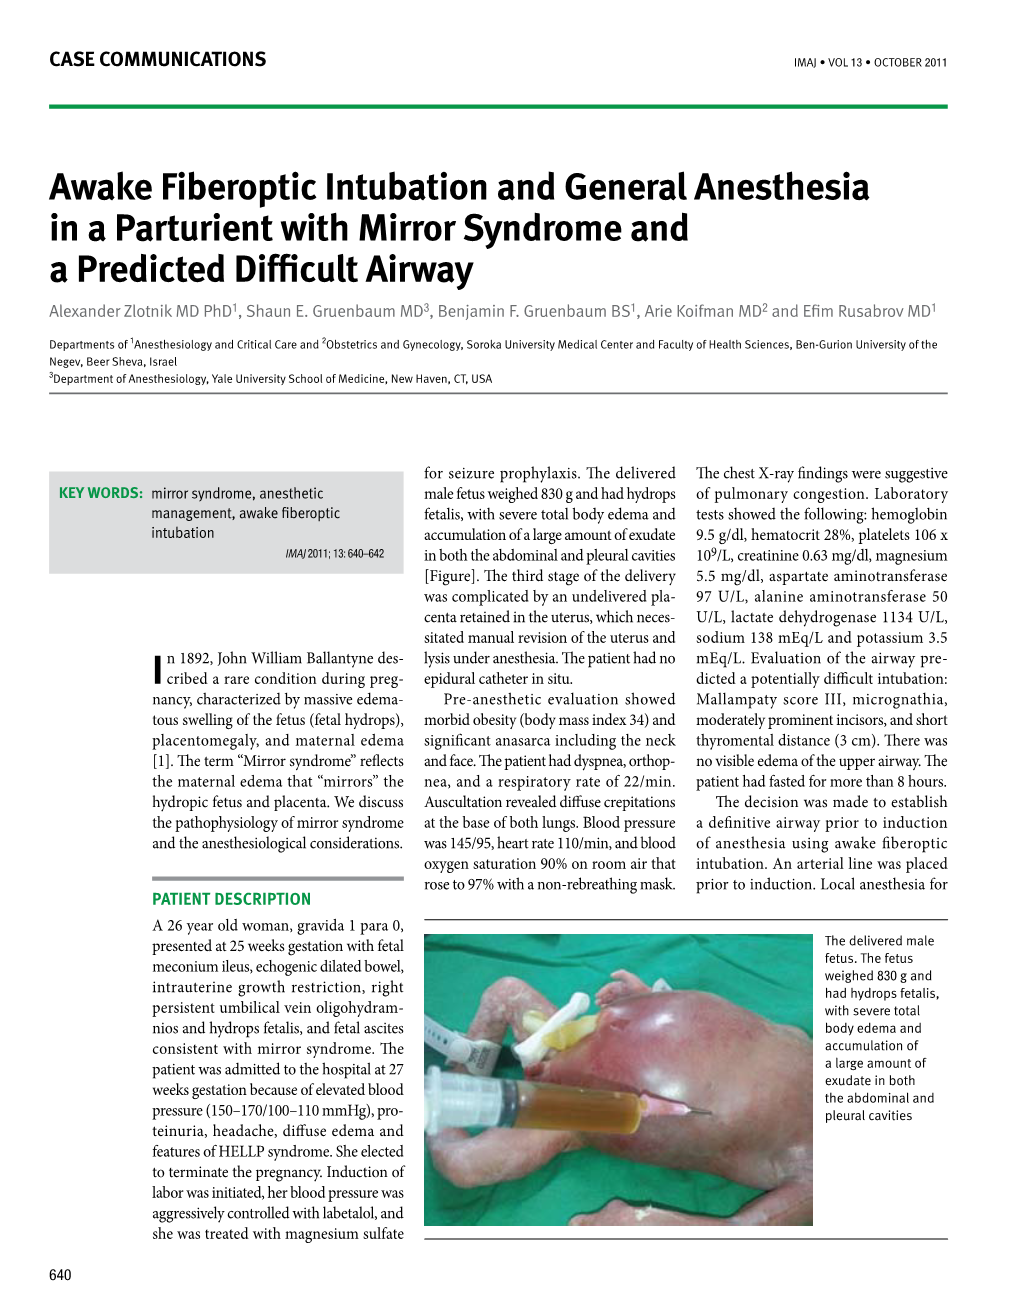 Awake Fiberoptic Intubation and General Anesthesia in a Parturient with Mirror Syndrome and a Predicted Difficult Airway Alexander Zlotnik MD Phd1, Shaun E